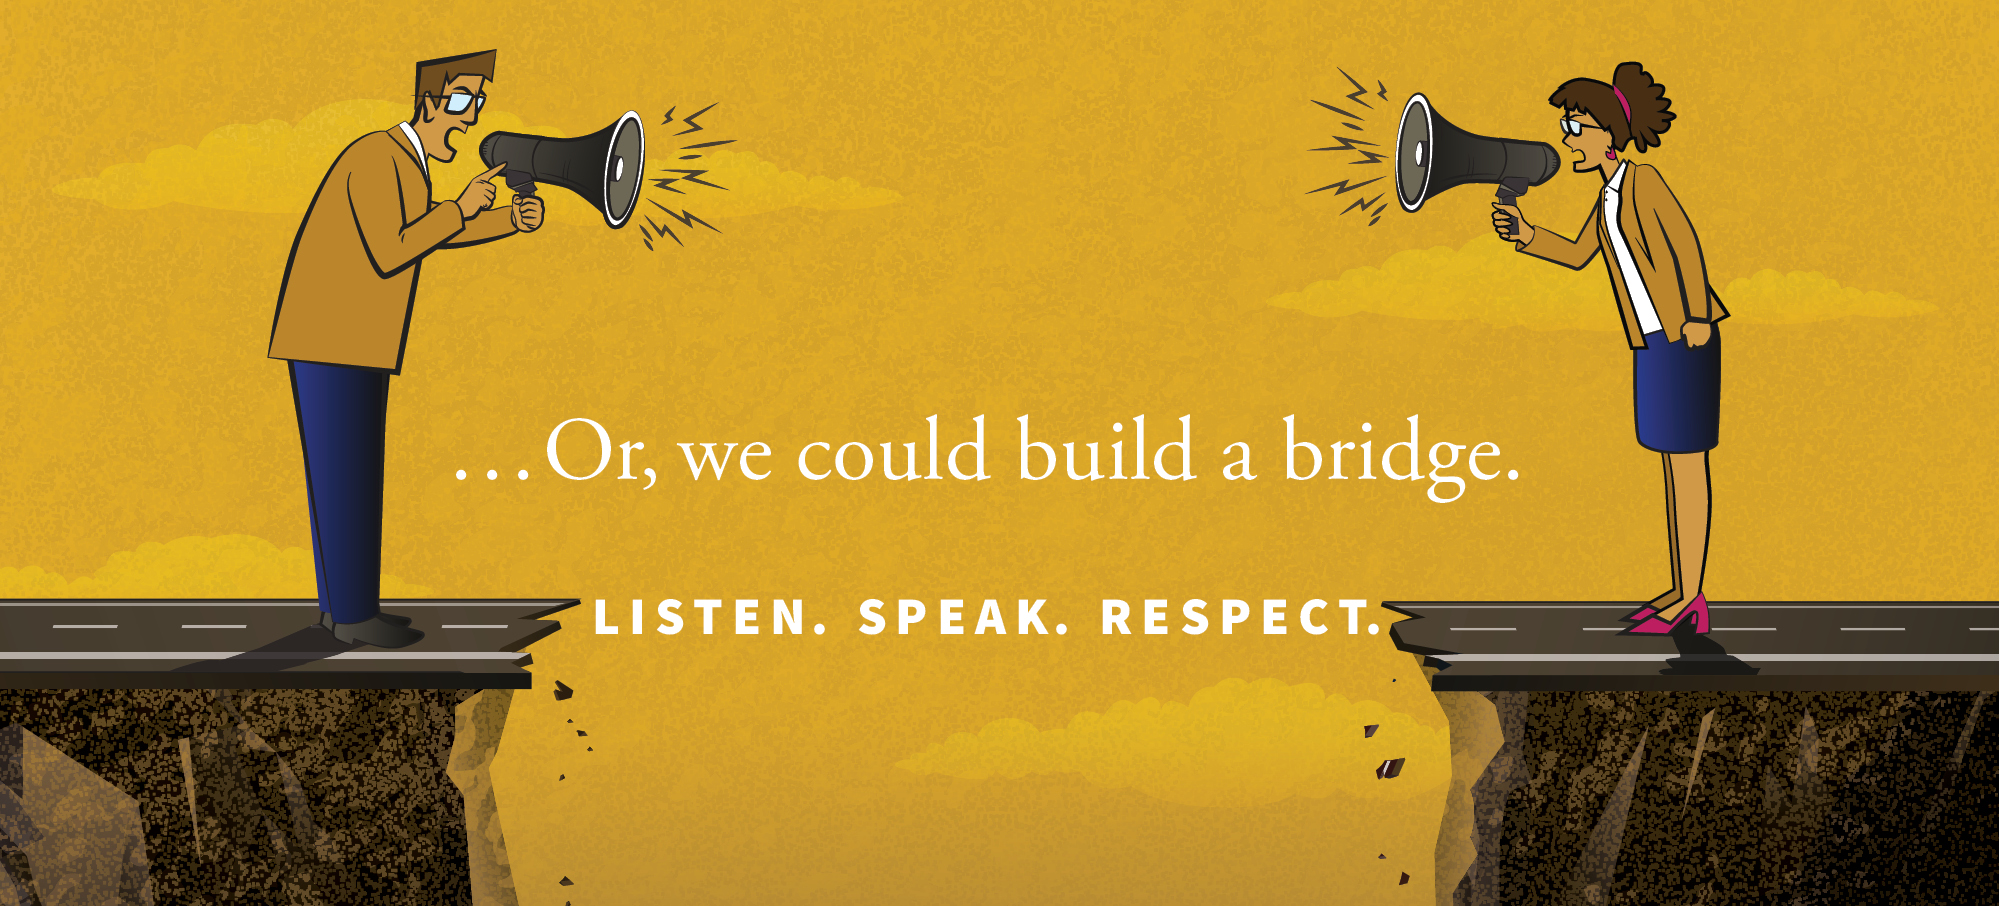 Graphic showing people shouting at each other with bullhorns across a divide. Text on it says "... or we could build a bridge. Listen. Speak. Respect."